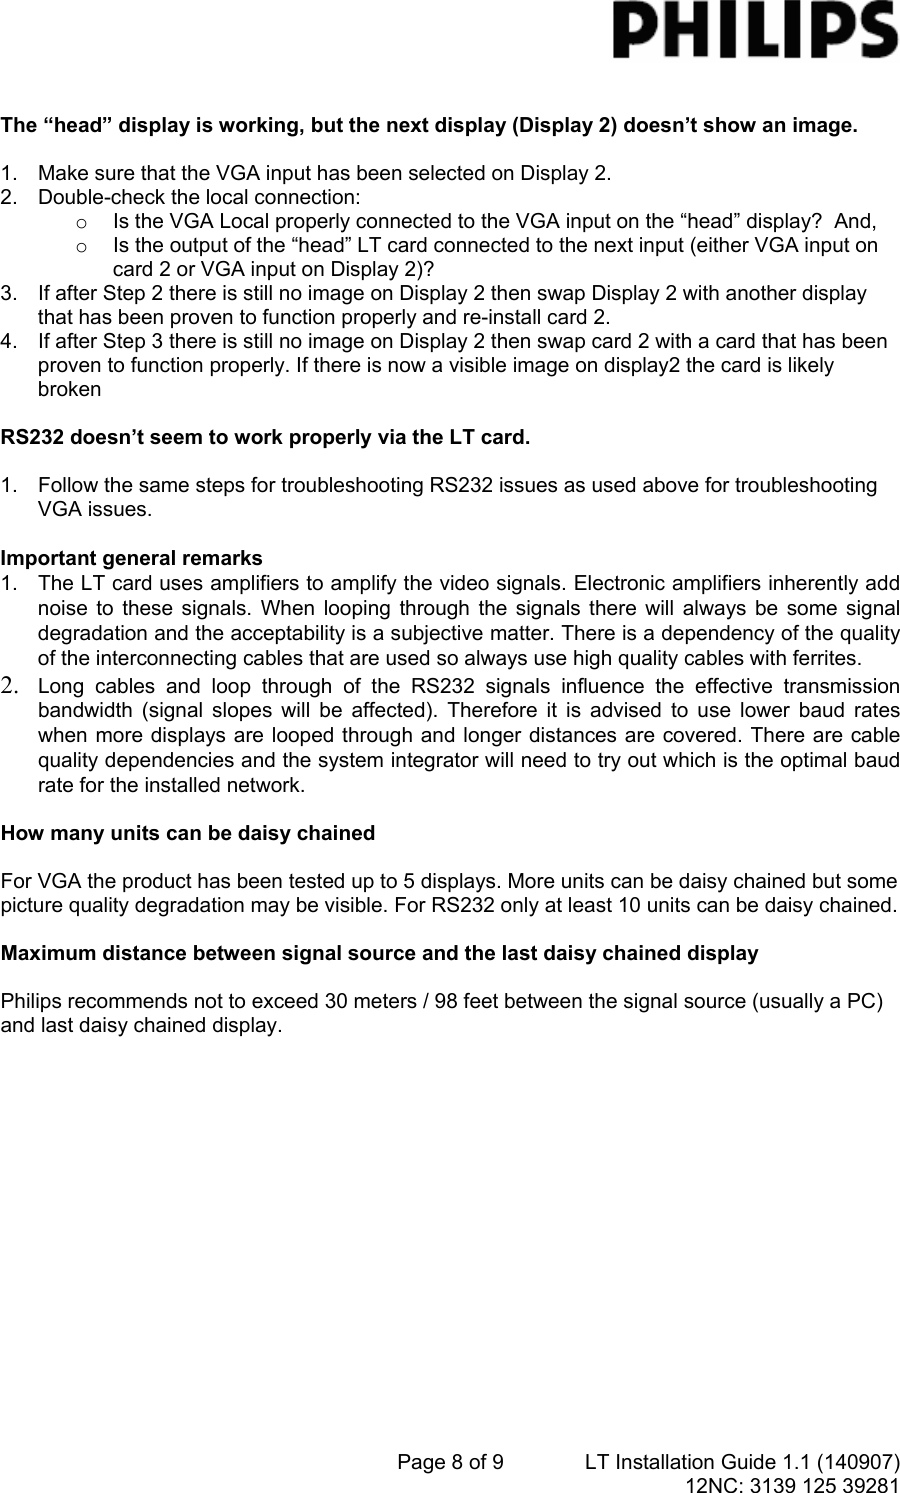 Page 8 of 9 - Philips Philips-Cra01-00-Owner-S-Manual Installation Guide For NetX